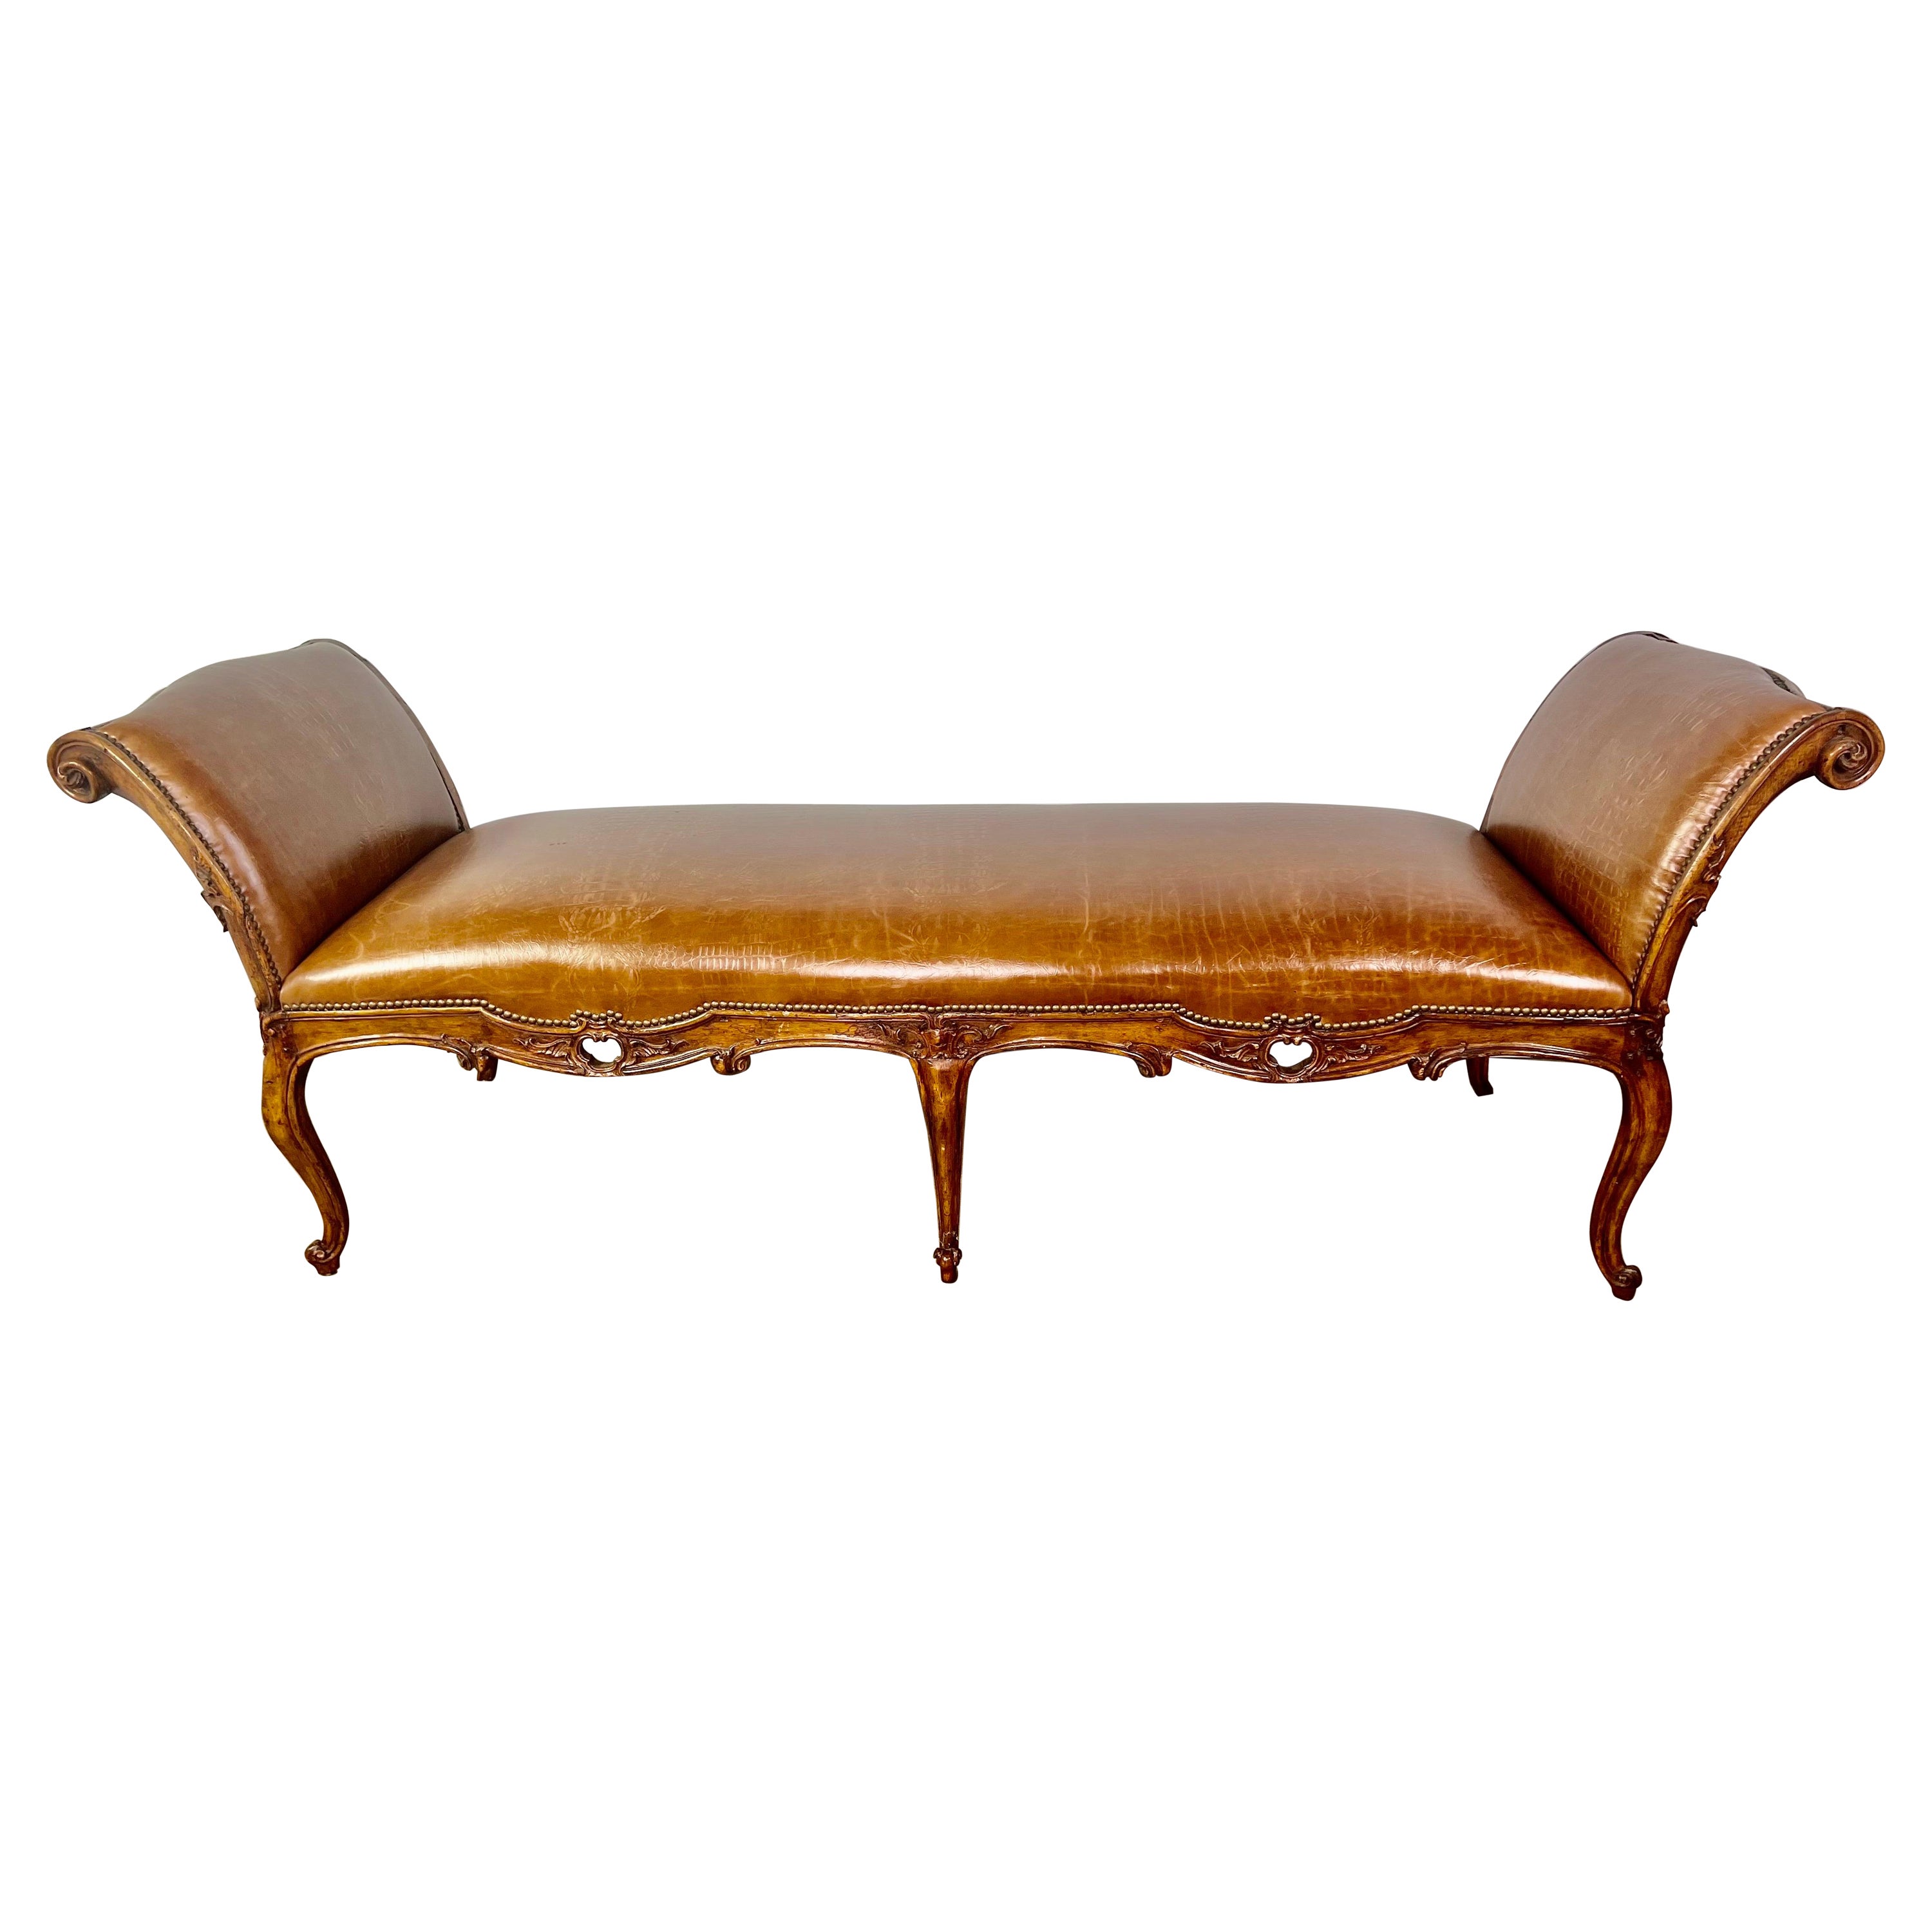 19th Century French Embossed Leather Four Legged Bench